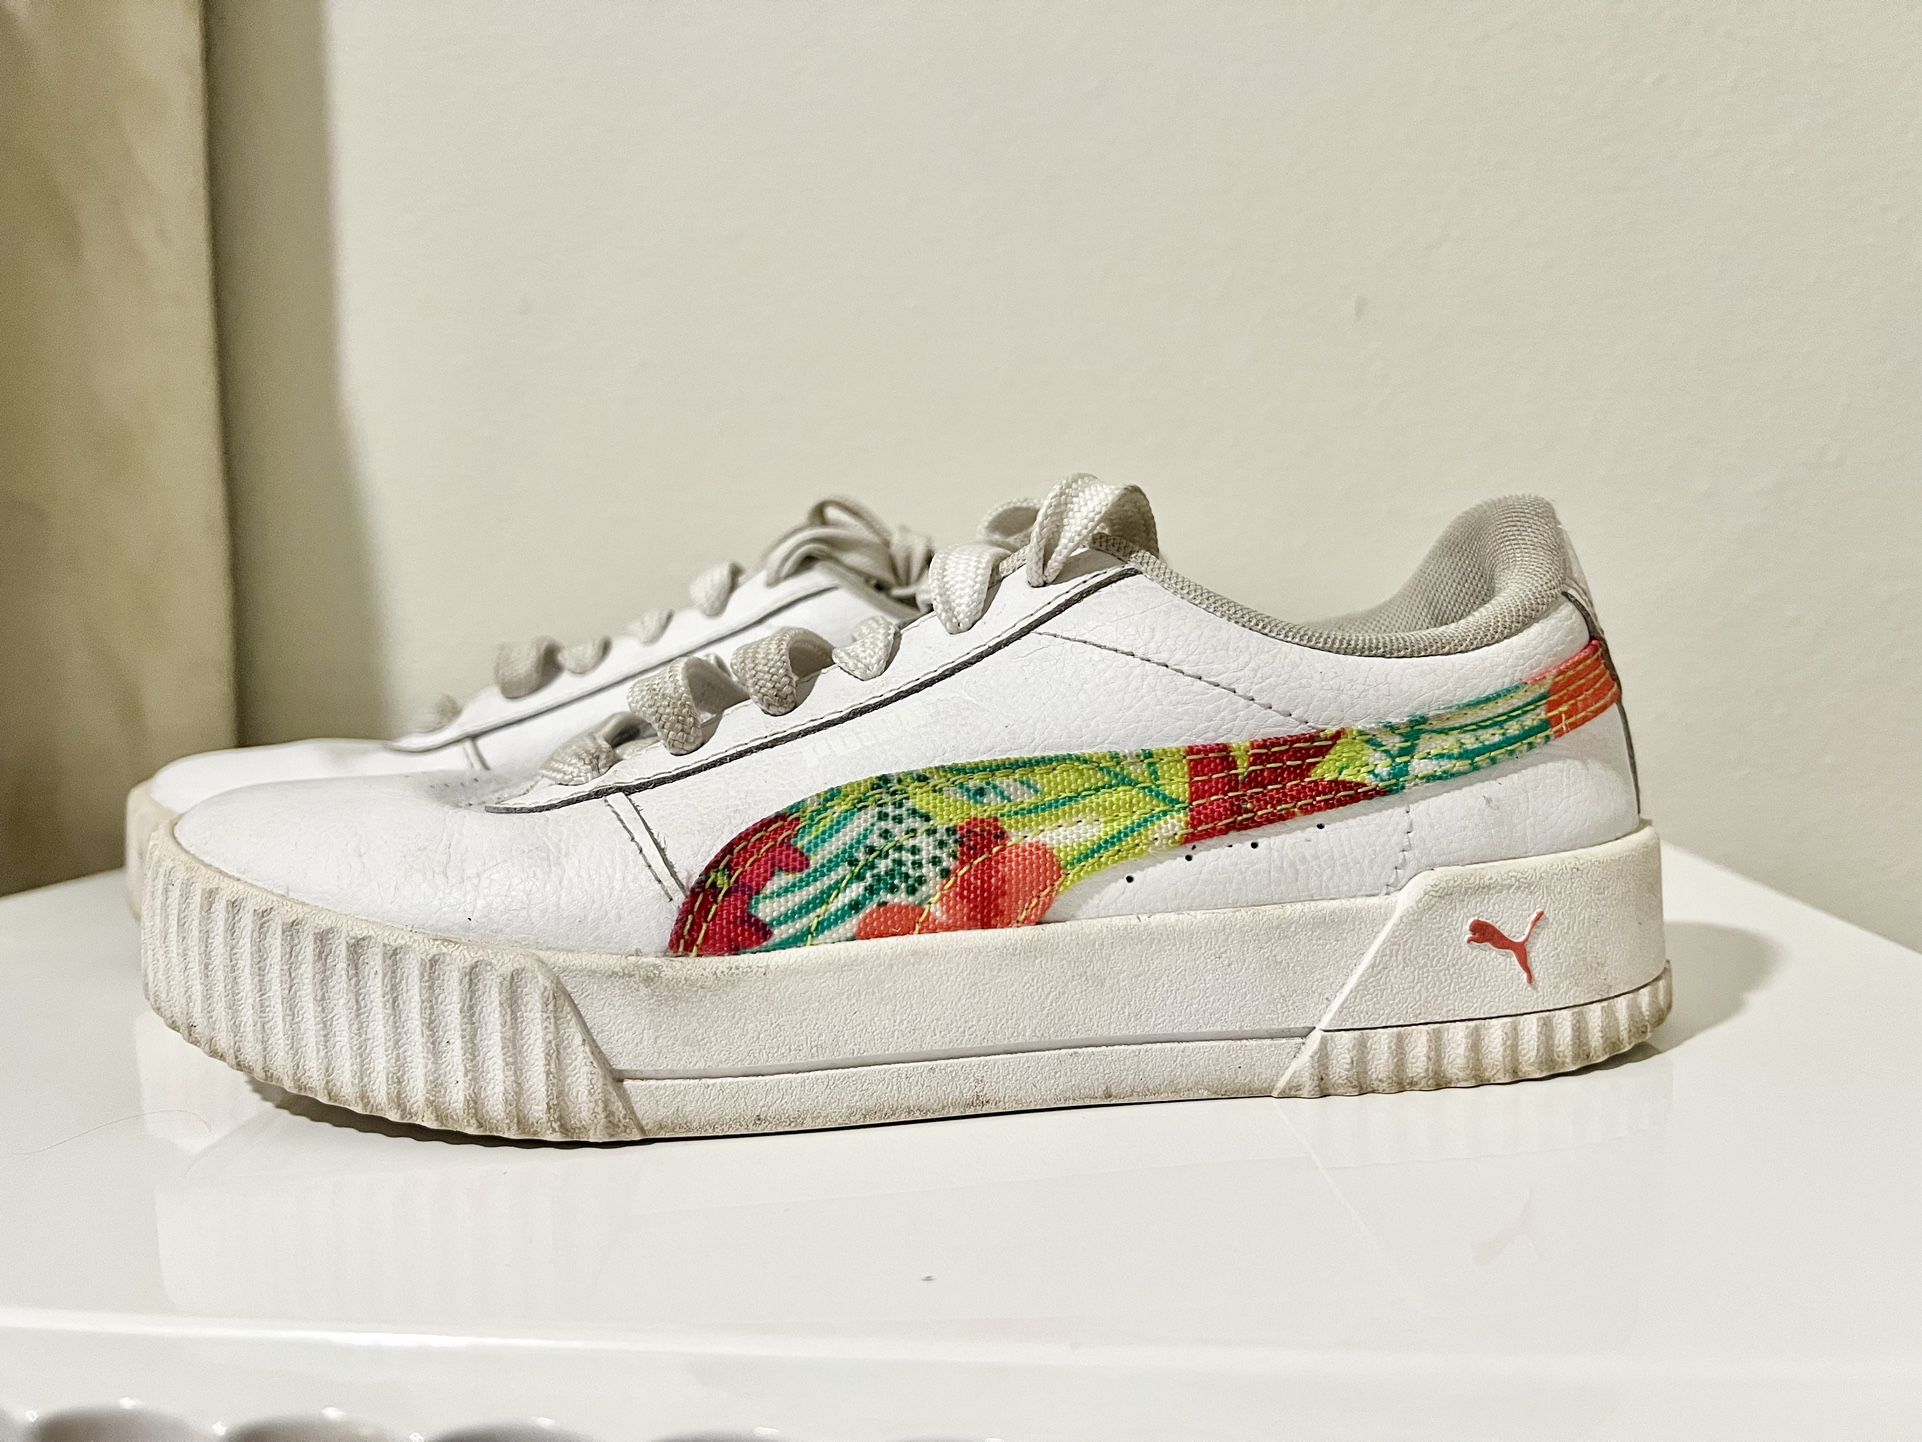 Puma Carina Tropical Punch Women's Size 8.5 White Green Leather Low Top Sneaker